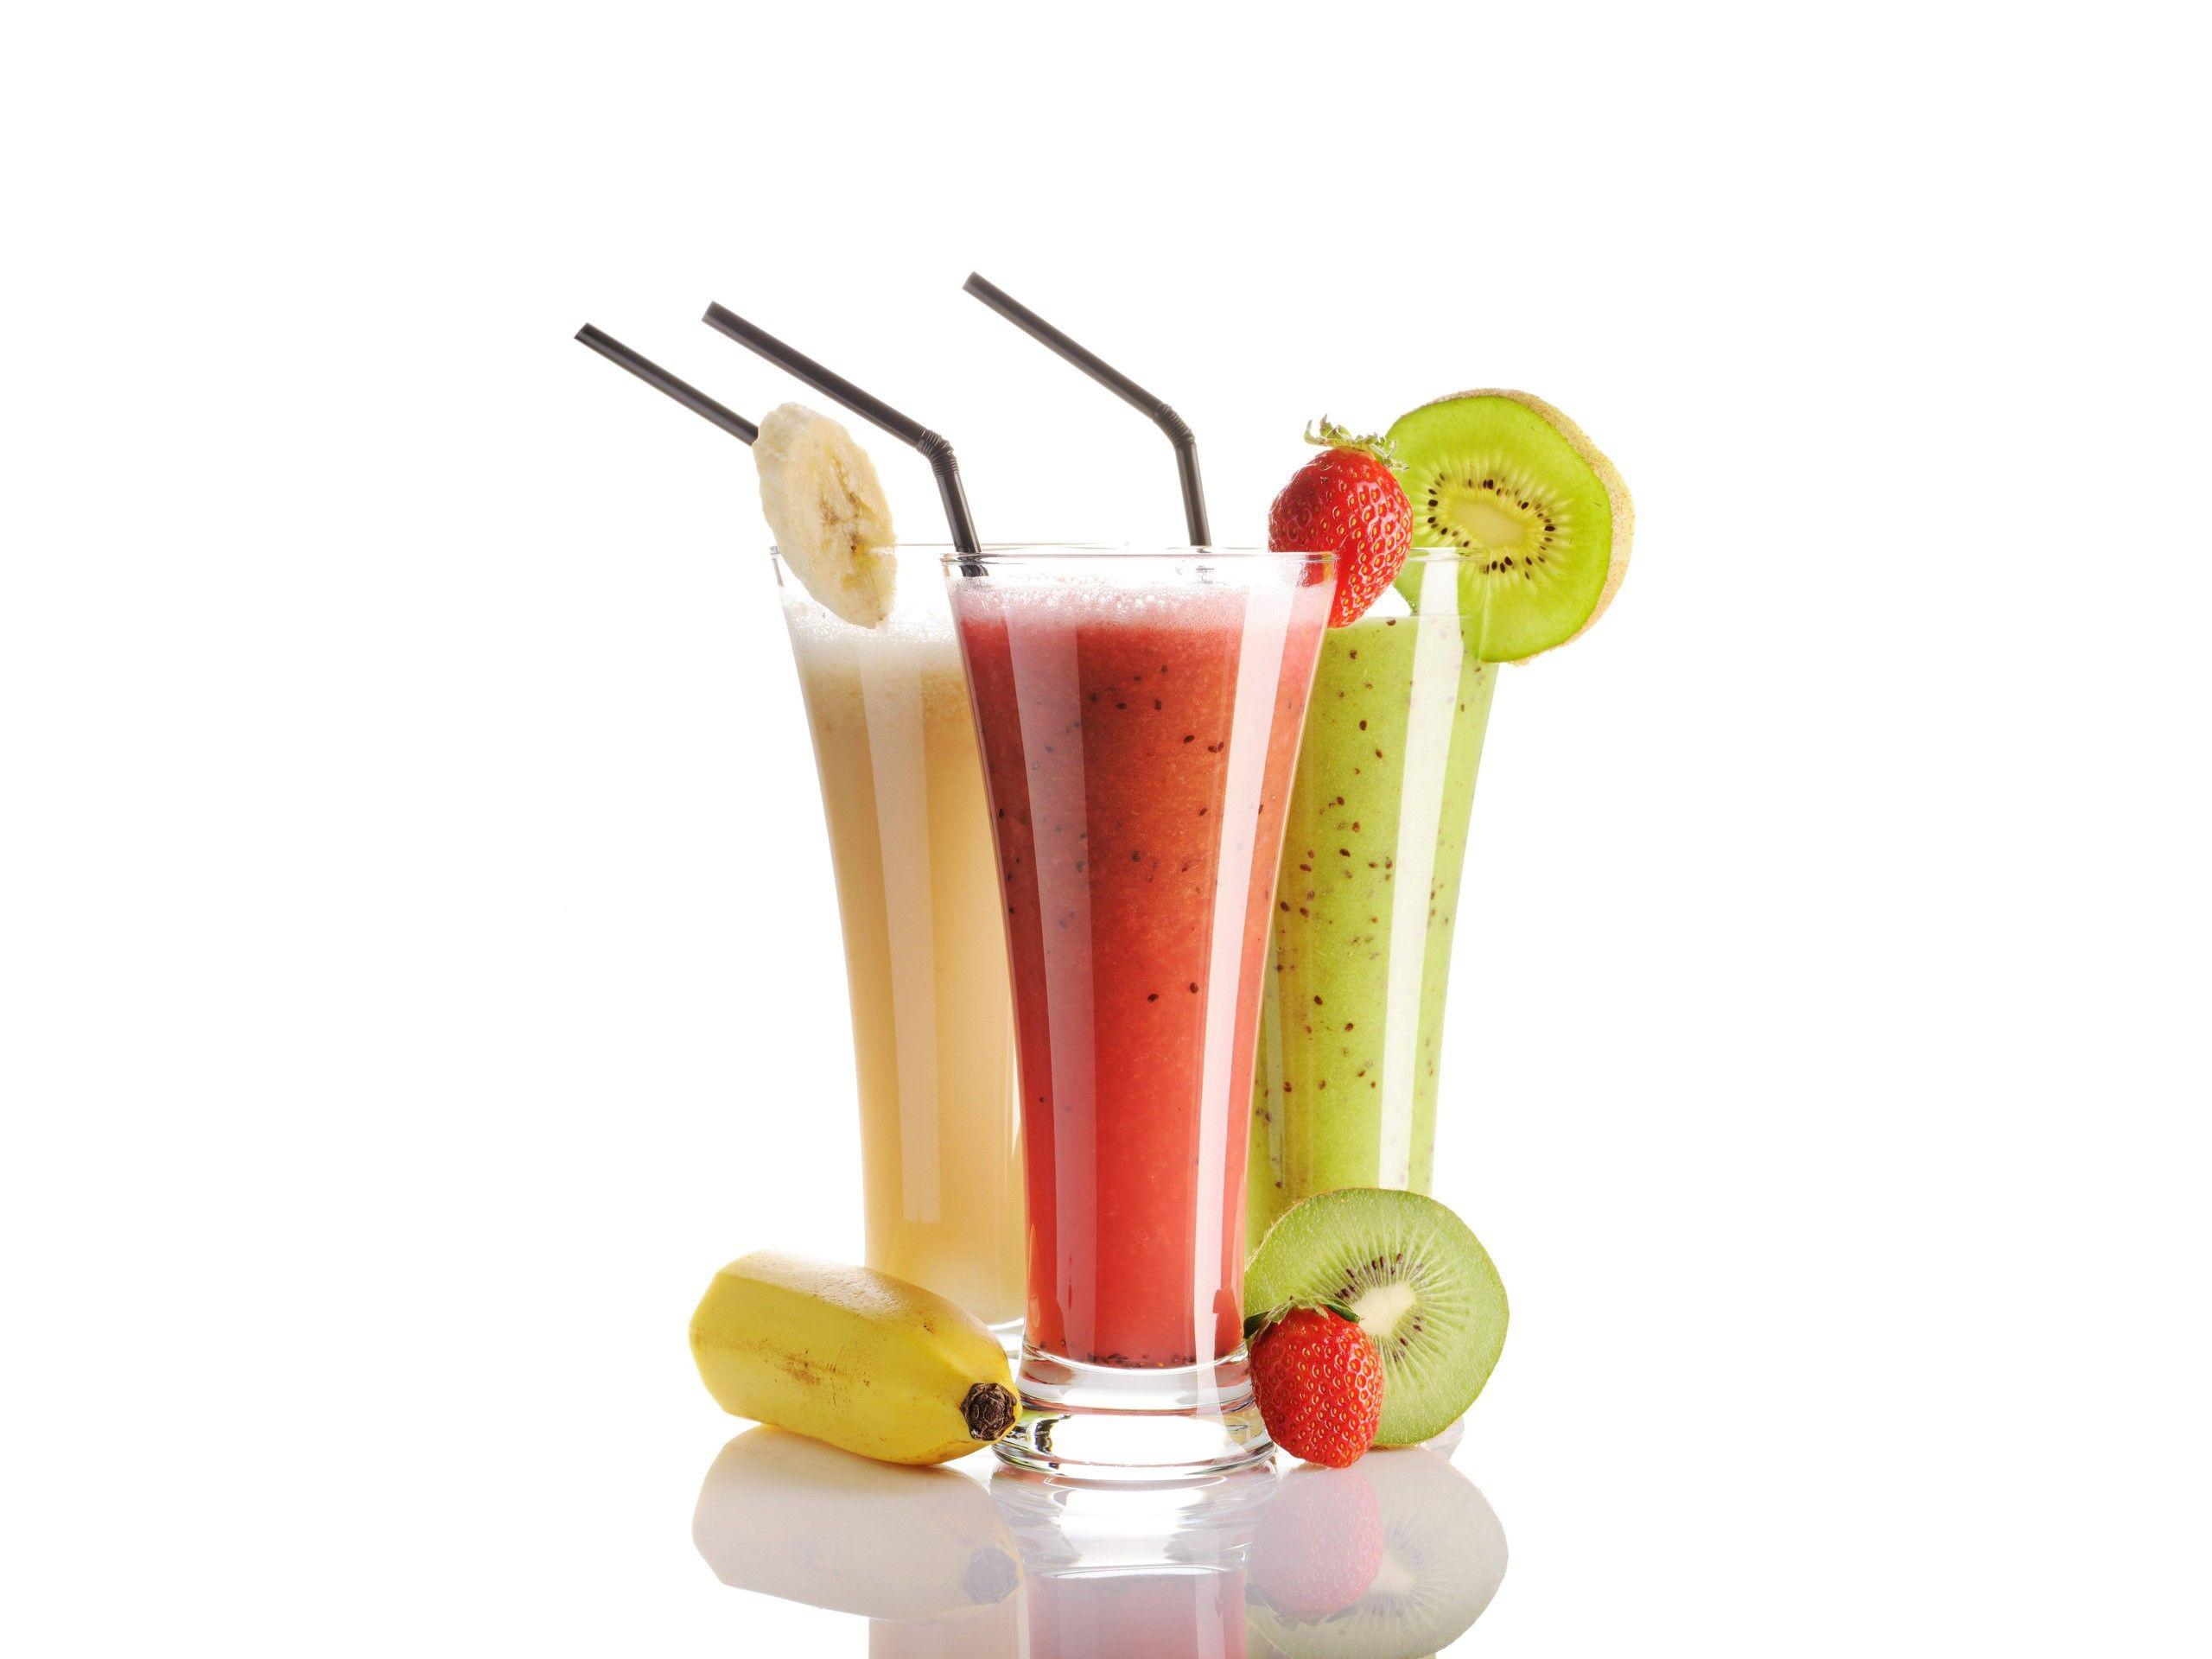 Three Drinks Glass of Banana Smoothie Free Image Download. HD